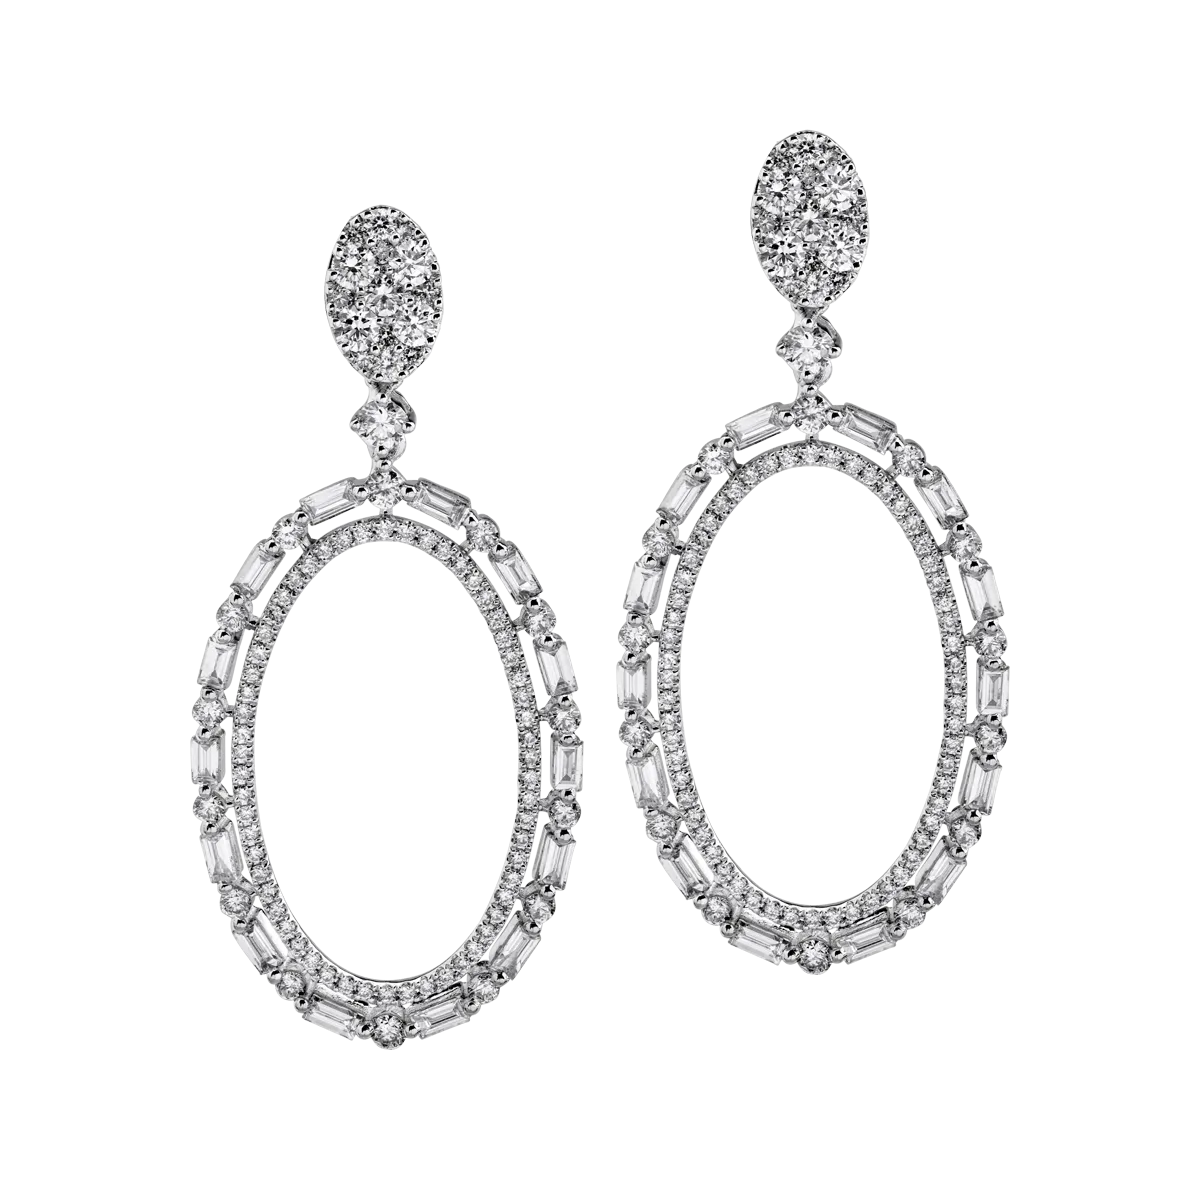 18K white gold earrings with 1.98ct diamonds